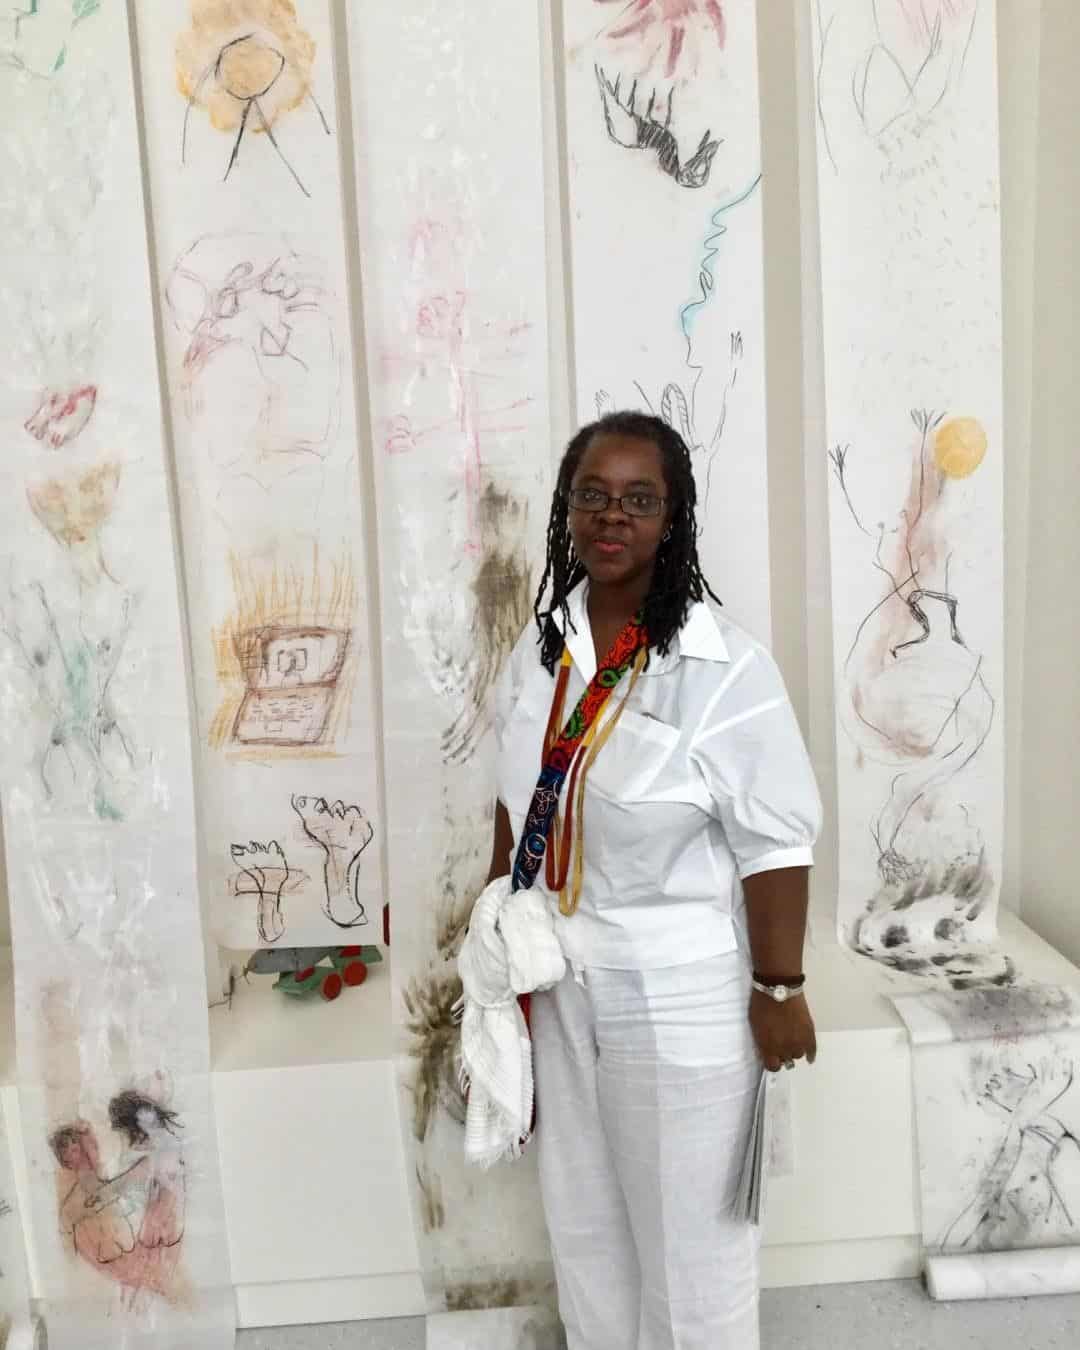 Photography and art curator, Bisi Silva dies at 56